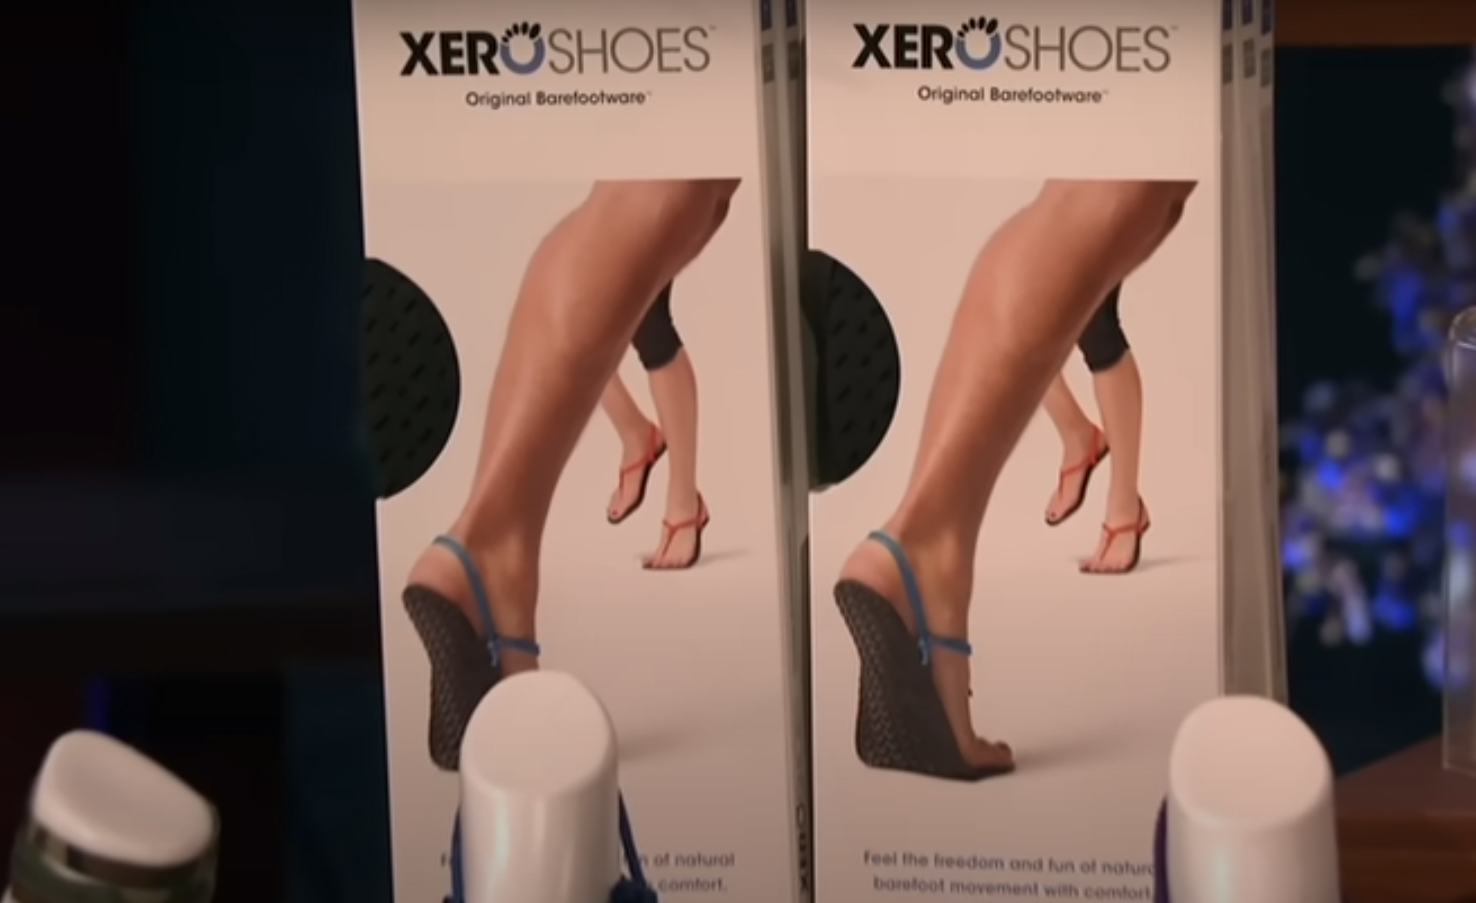 What Is Xero Shoes?